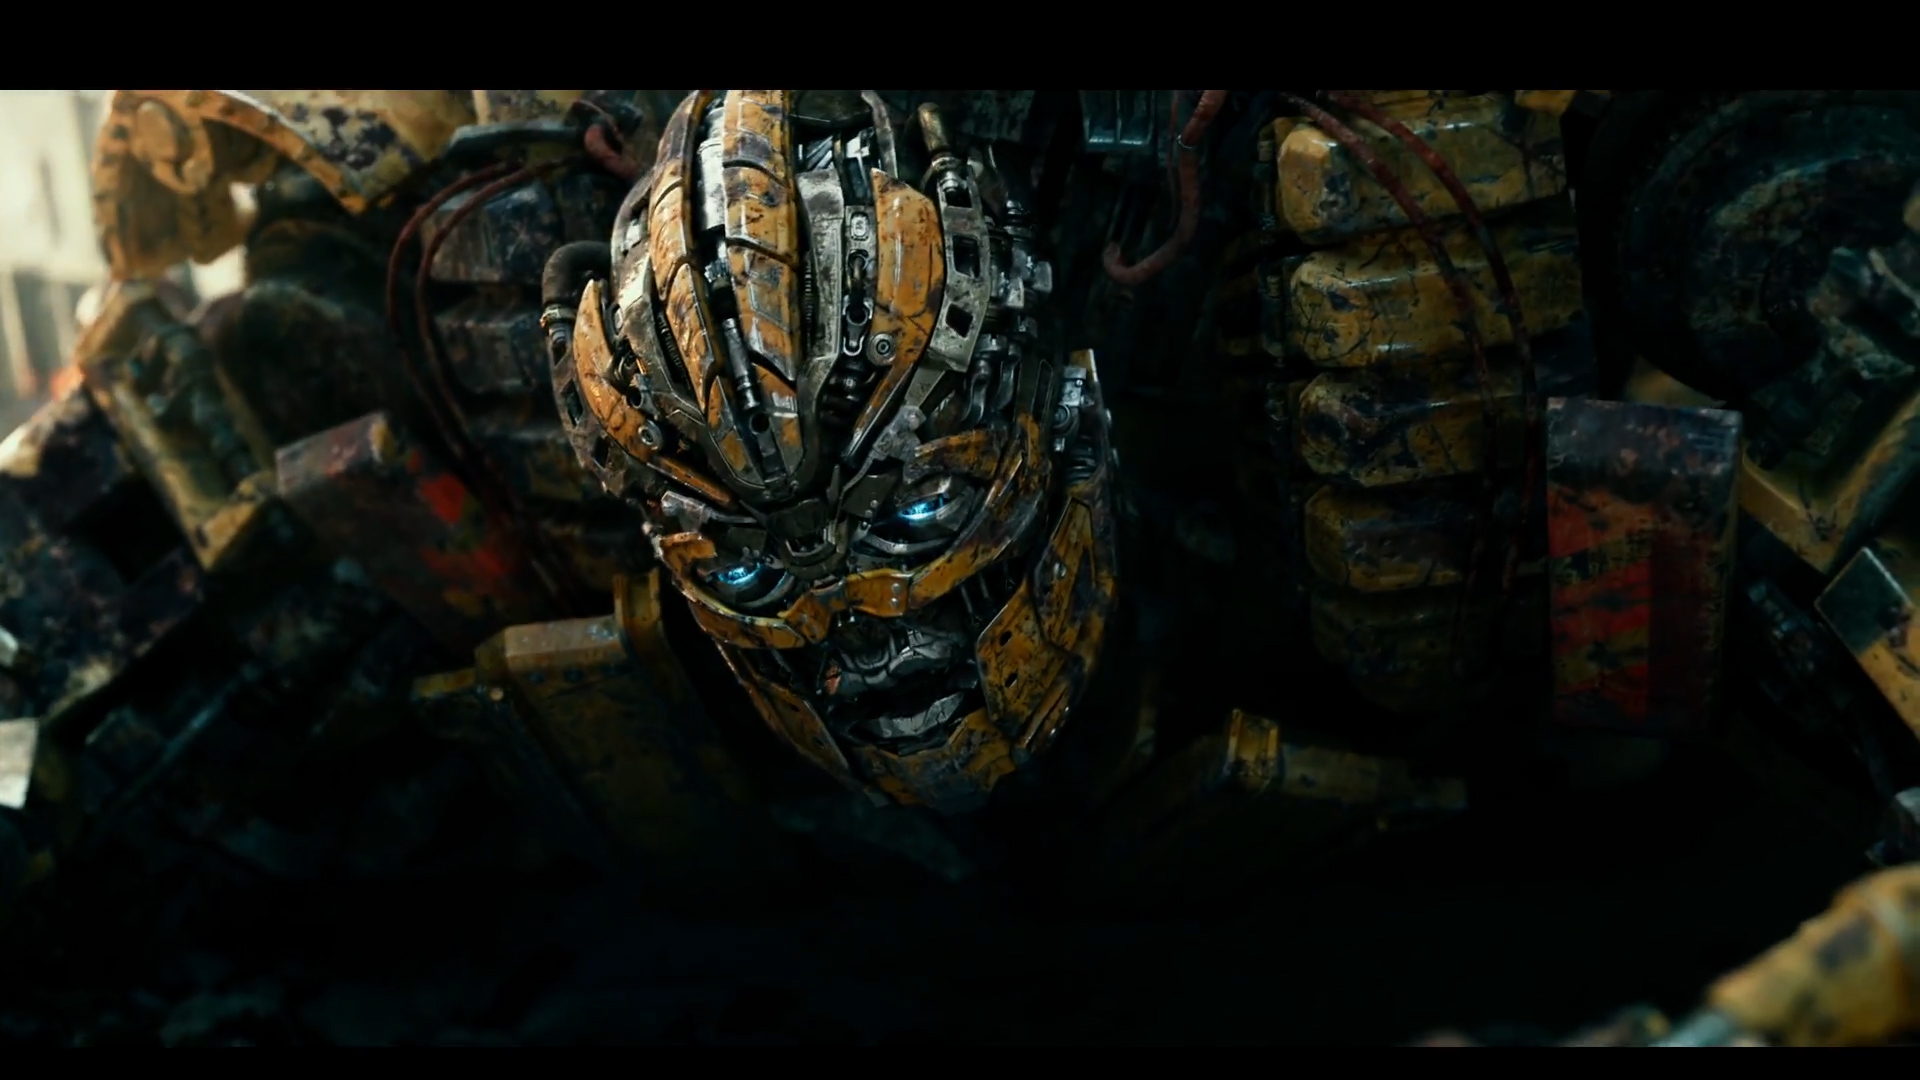 A Painful Shot-By-Shot Breakdown Of The Transformers: The Last Knight Trailer